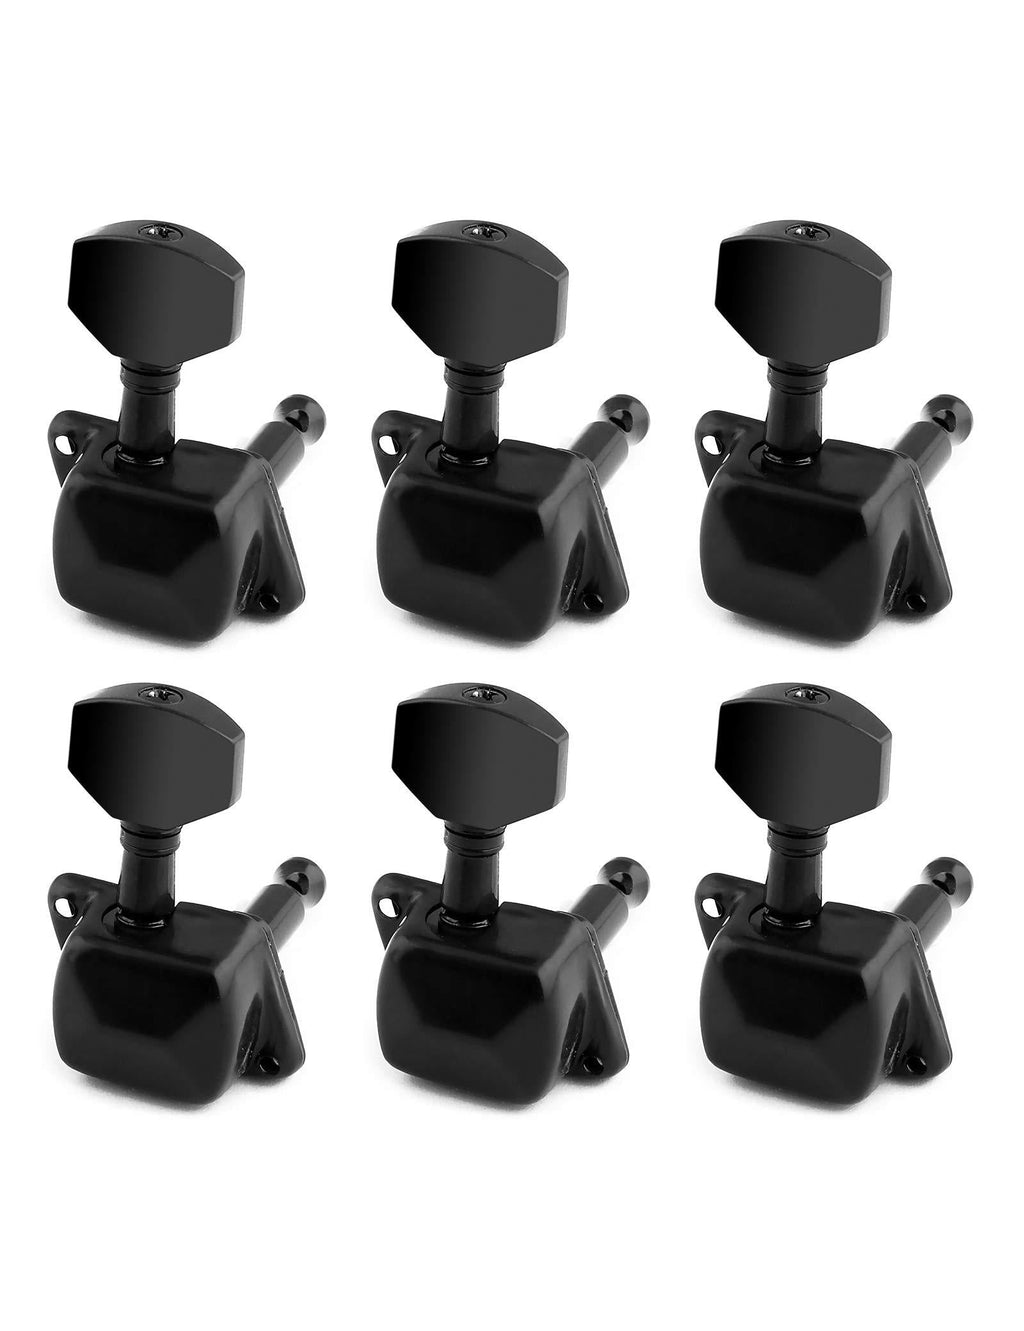 Holmer Guitar String Tuning Pegs Semiclosed Machine Heads Tuners Tuning Keys 6 in Line for Right Handed Acoustic Guitar or Electric Guitar Black.